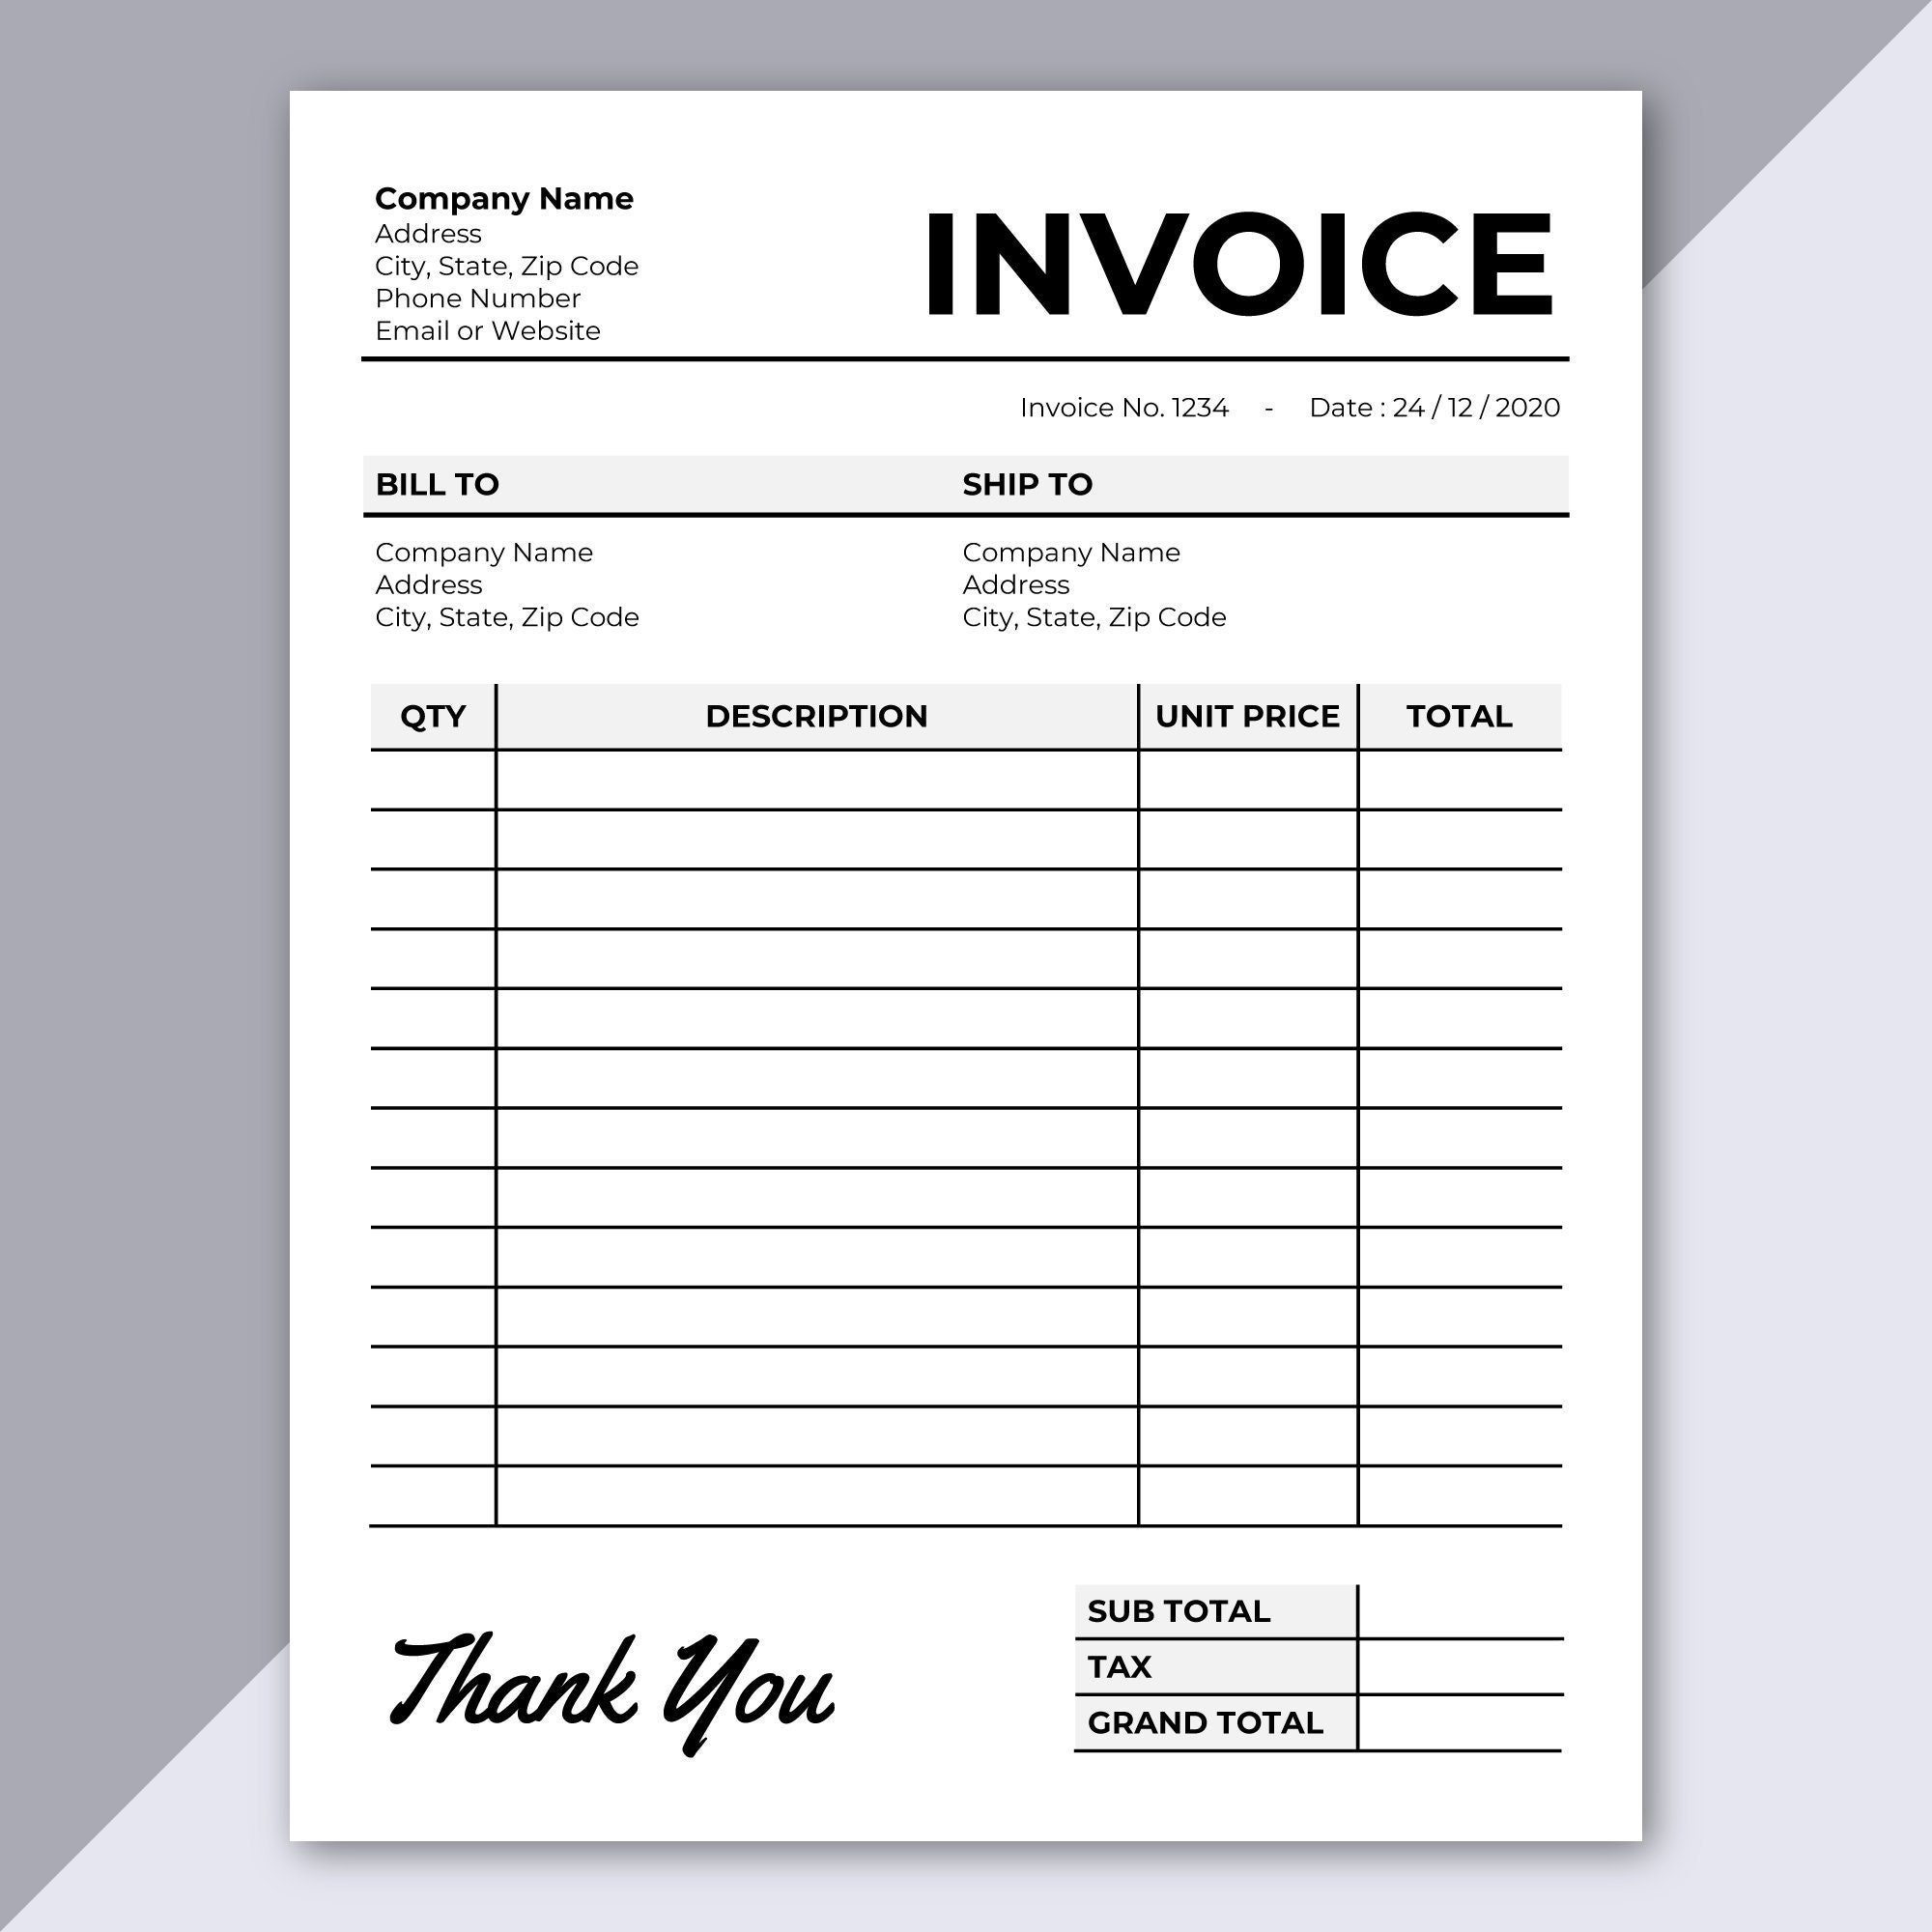 Get Your Editable Instant Download PDF Invoice Today Photography 